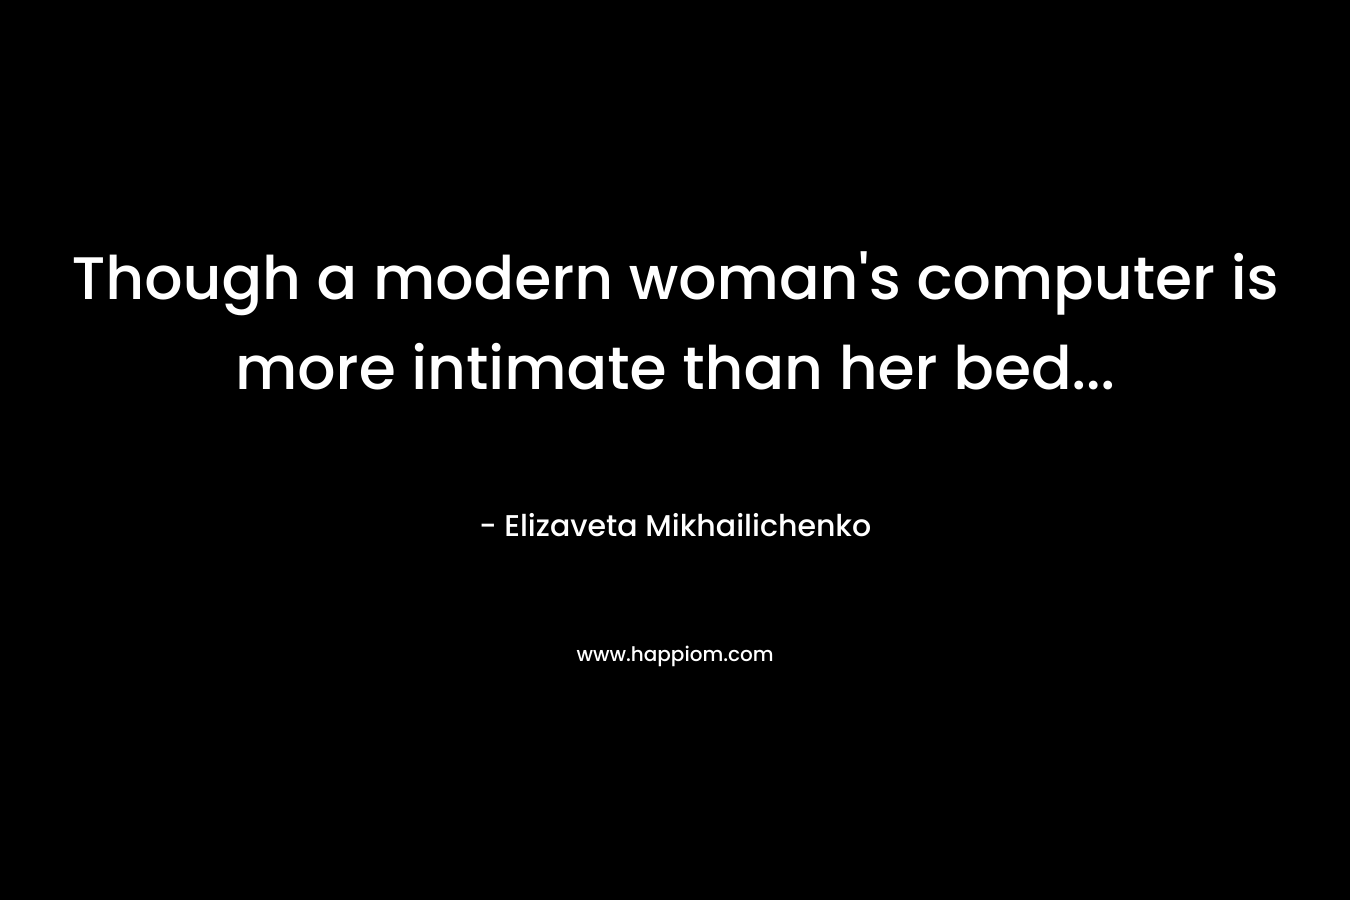 Though a modern woman’s computer is more intimate than her bed… – Elizaveta Mikhailichenko